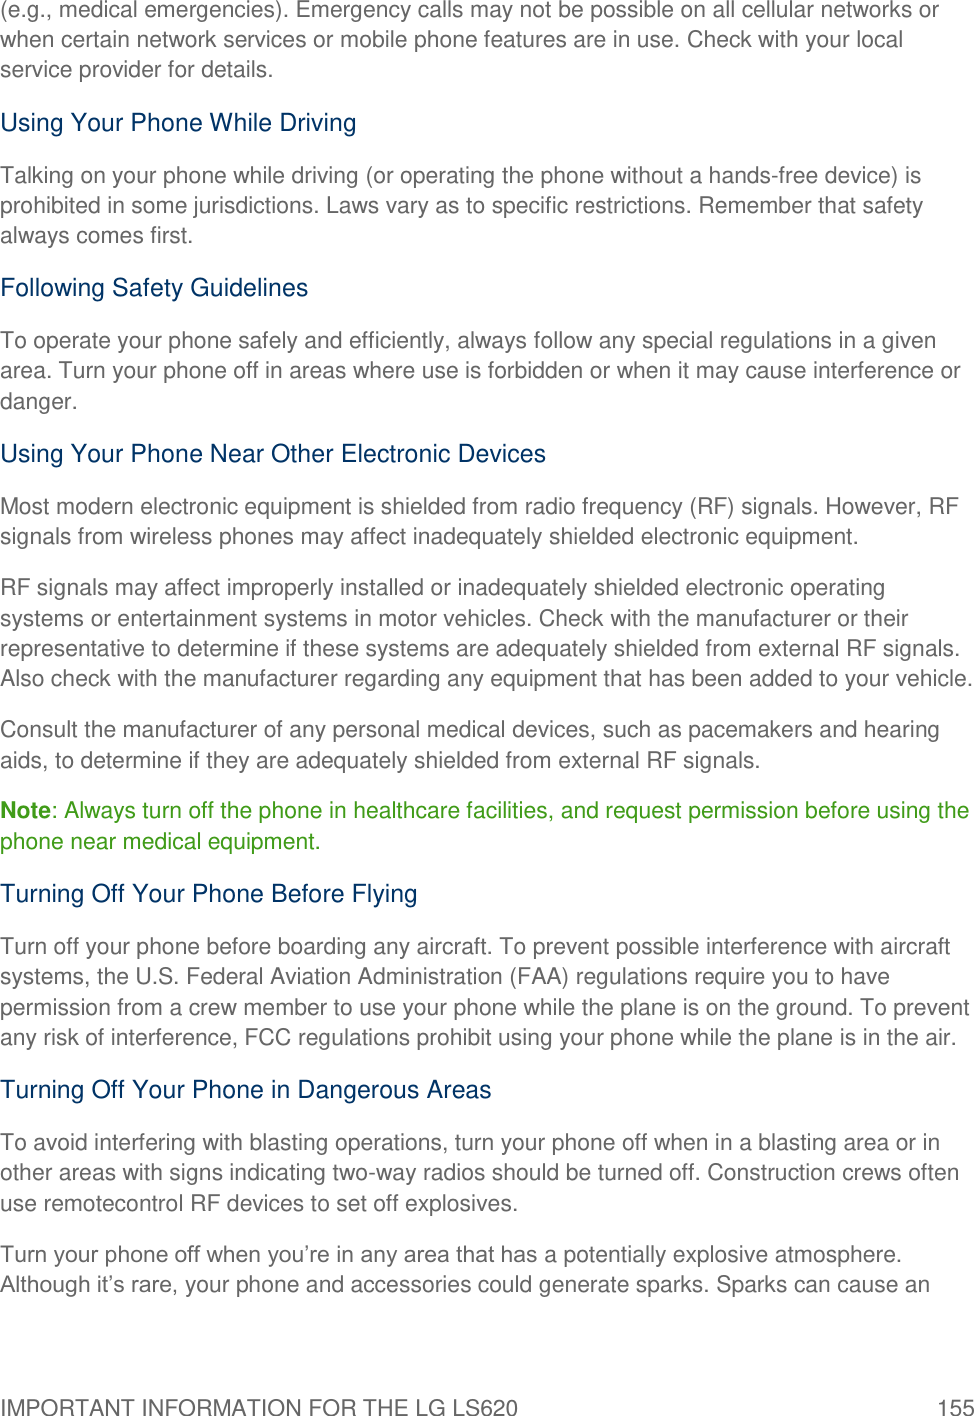 IMPORTANT INFORMATION FOR THE LG LS620  155 (e.g., medical emergencies). Emergency calls may not be possible on all cellular networks or when certain network services or mobile phone features are in use. Check with your local service provider for details. Using Your Phone While Driving Talking on your phone while driving (or operating the phone without a hands-free device) is prohibited in some jurisdictions. Laws vary as to specific restrictions. Remember that safety always comes first. Following Safety Guidelines To operate your phone safely and efficiently, always follow any special regulations in a given area. Turn your phone off in areas where use is forbidden or when it may cause interference or danger. Using Your Phone Near Other Electronic Devices Most modern electronic equipment is shielded from radio frequency (RF) signals. However, RF signals from wireless phones may affect inadequately shielded electronic equipment. RF signals may affect improperly installed or inadequately shielded electronic operating systems or entertainment systems in motor vehicles. Check with the manufacturer or their representative to determine if these systems are adequately shielded from external RF signals. Also check with the manufacturer regarding any equipment that has been added to your vehicle. Consult the manufacturer of any personal medical devices, such as pacemakers and hearing aids, to determine if they are adequately shielded from external RF signals. Note: Always turn off the phone in healthcare facilities, and request permission before using the phone near medical equipment. Turning Off Your Phone Before Flying Turn off your phone before boarding any aircraft. To prevent possible interference with aircraft systems, the U.S. Federal Aviation Administration (FAA) regulations require you to have permission from a crew member to use your phone while the plane is on the ground. To prevent any risk of interference, FCC regulations prohibit using your phone while the plane is in the air. Turning Off Your Phone in Dangerous Areas To avoid interfering with blasting operations, turn your phone off when in a blasting area or in other areas with signs indicating two-way radios should be turned off. Construction crews often use remotecontrol RF devices to set off explosives. Turn your phone off when you‘re in any area that has a potentially explosive atmosphere. Although it‘s rare, your phone and accessories could generate sparks. Sparks can cause an 